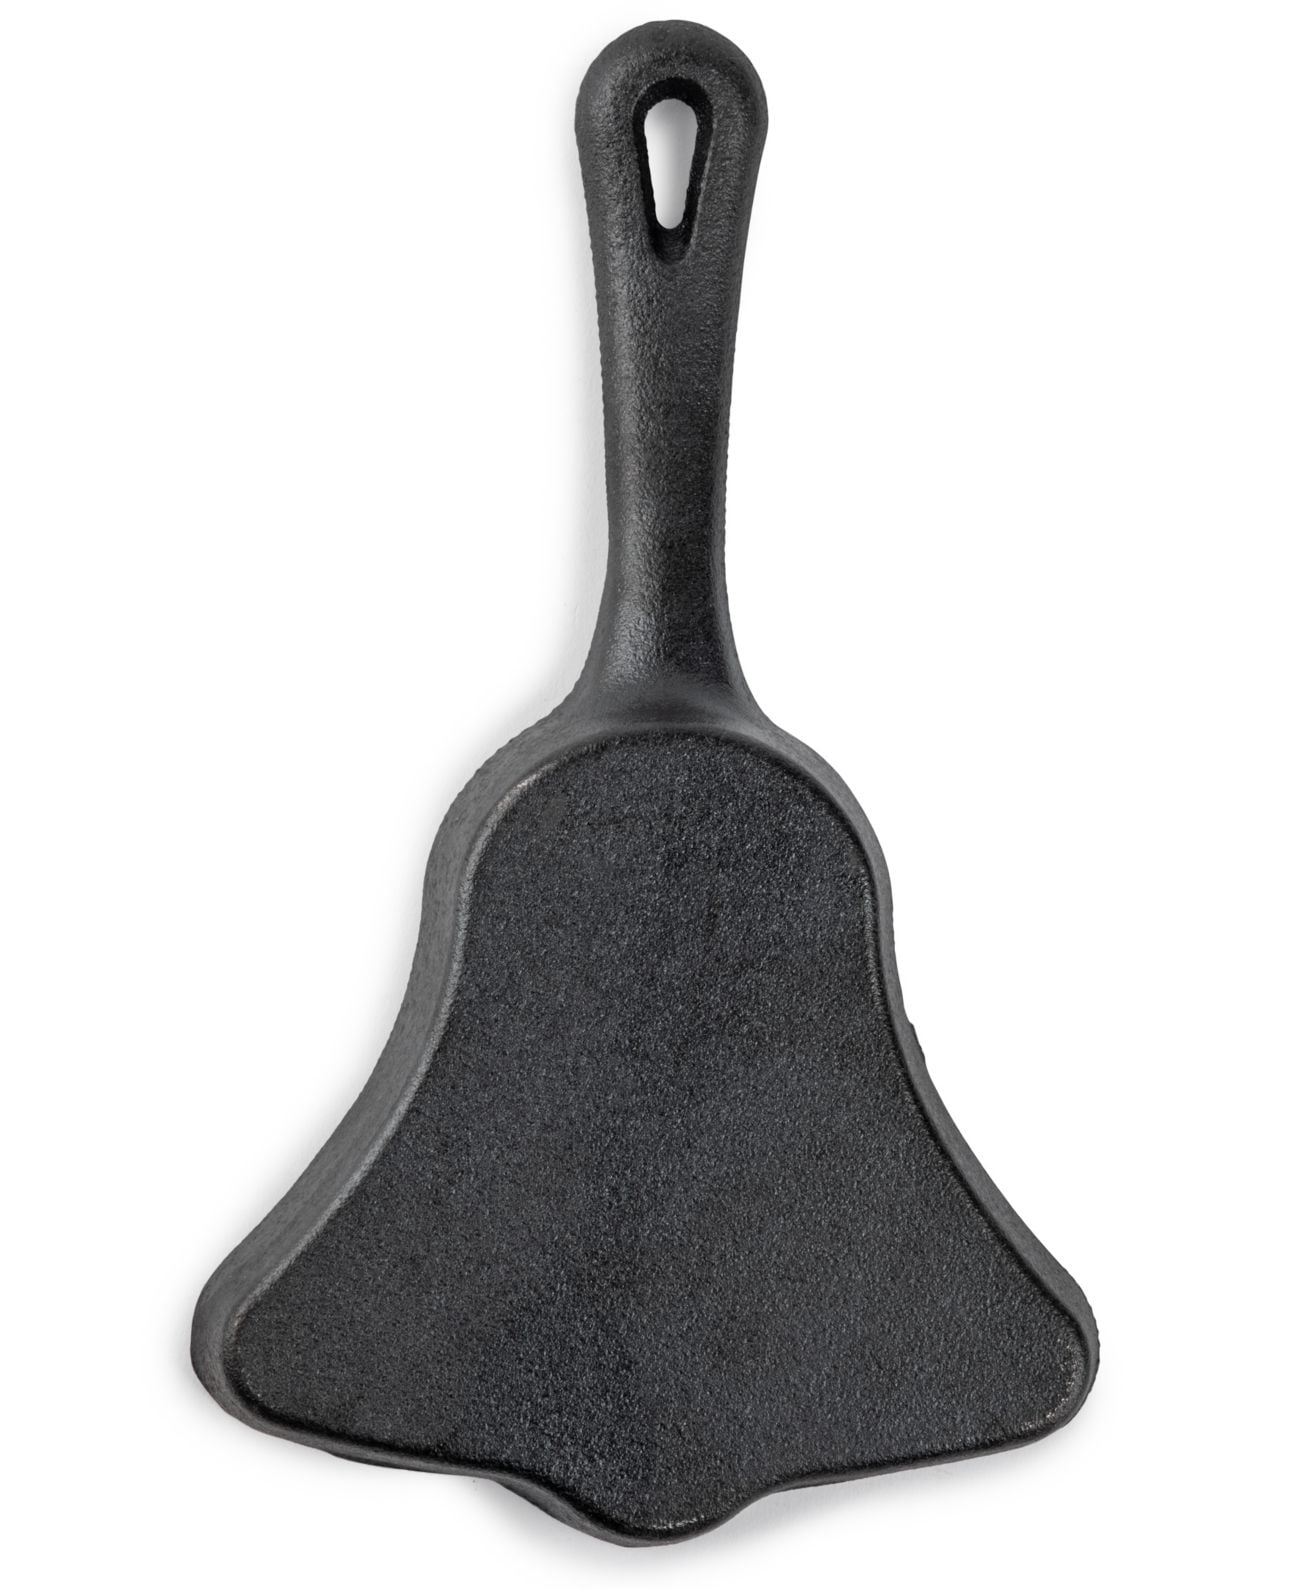 Cast Iron Skillet Baking Kit - Brookie - SKCK-2 - Brilliant Promotional  Products